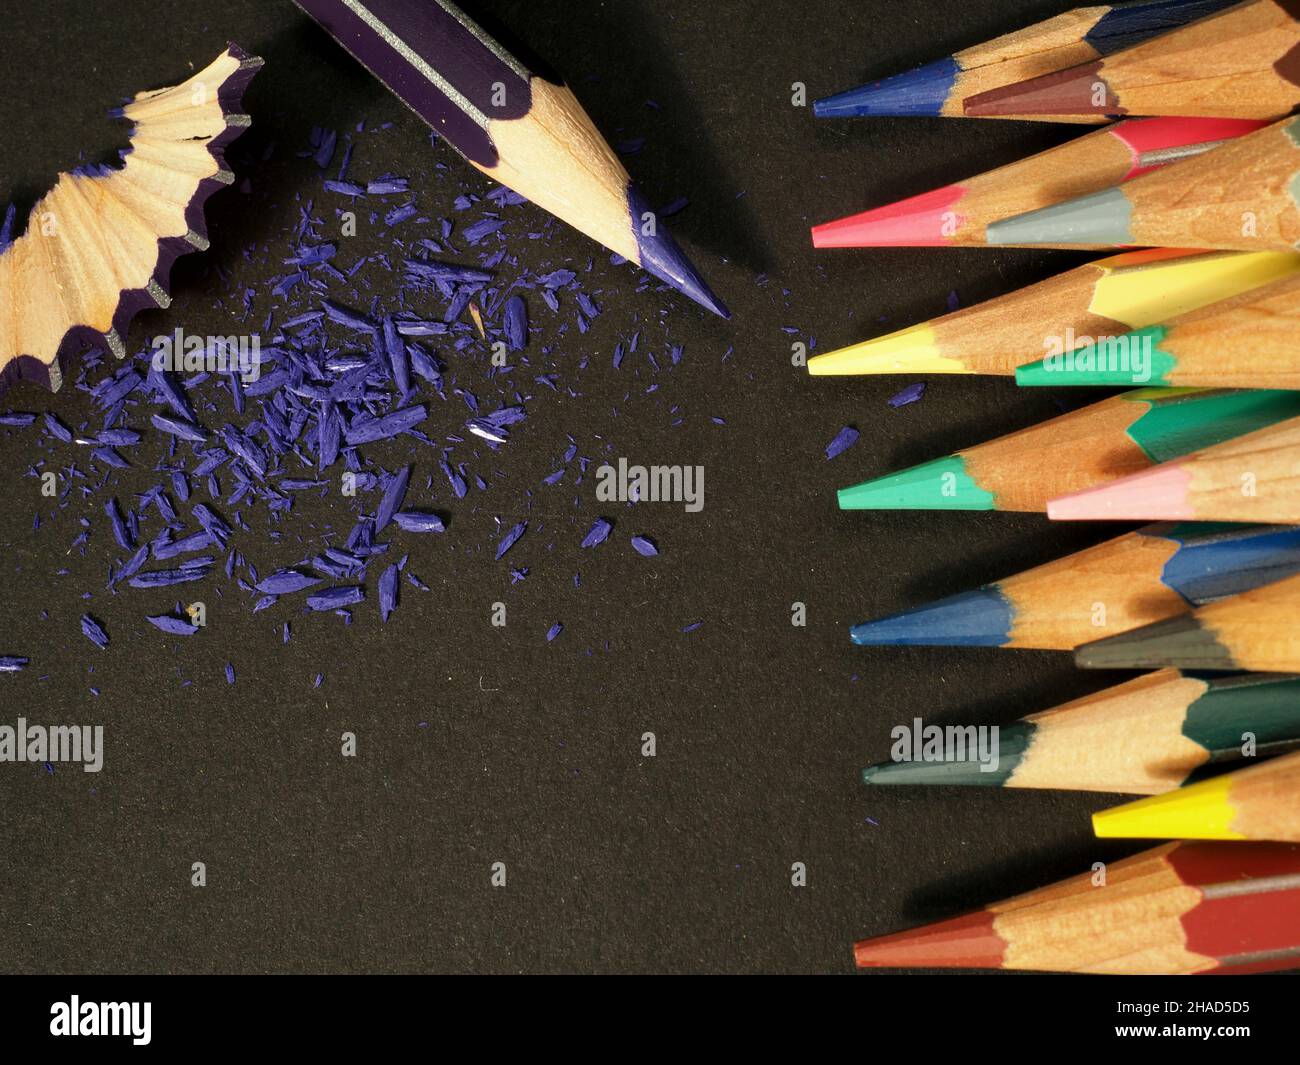 Sharpened coloured pencil crayons Stock Photo